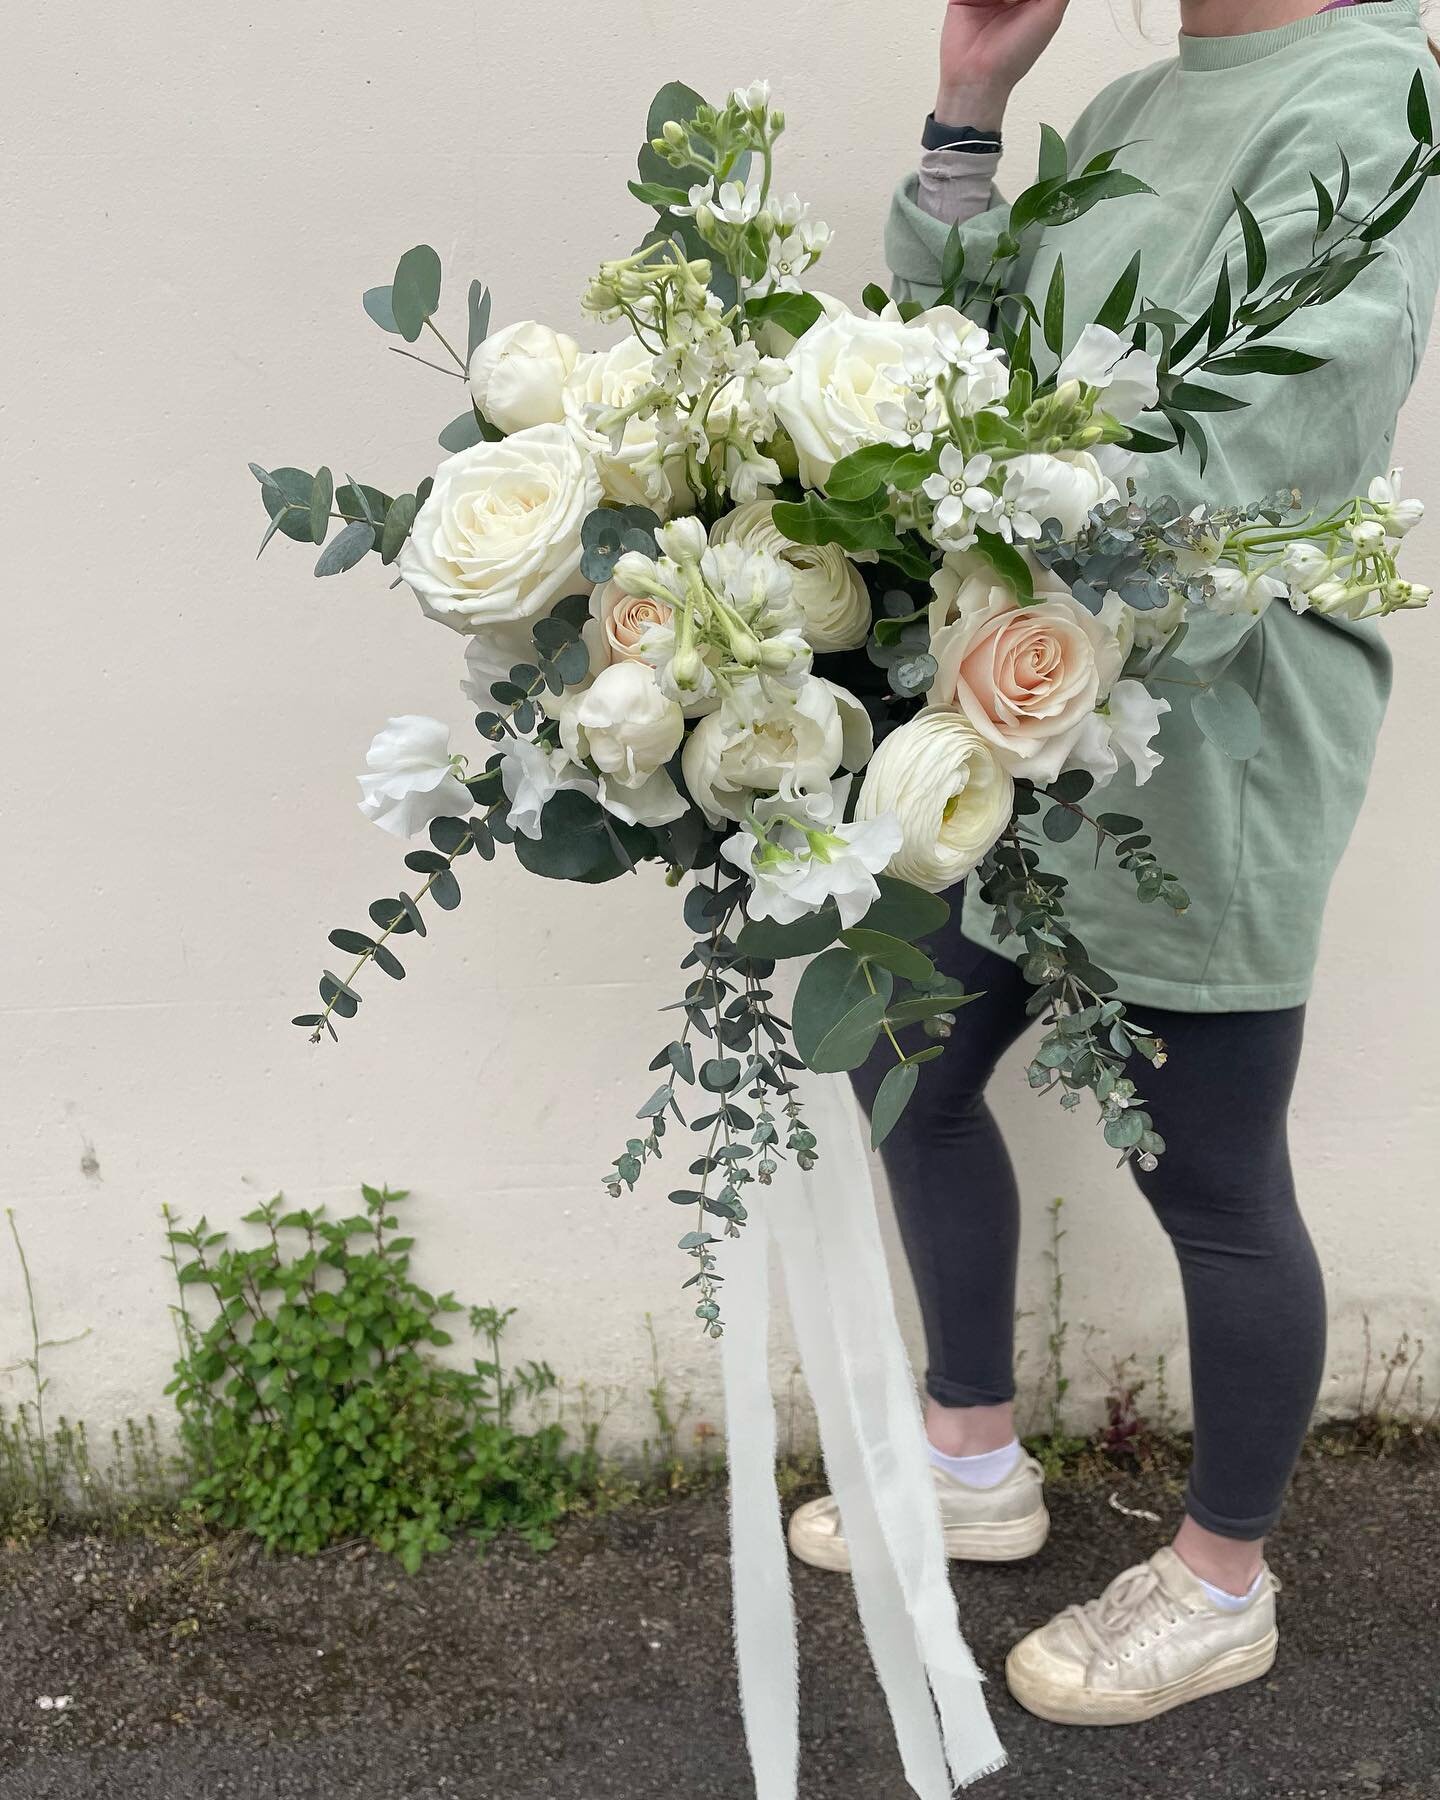 Huge congratulations to Sarah &amp; Jack who got married at the weekend! 

Get in touch if you&rsquo;d like us to flower your wedding hello@littleinteriorco.com 

Grace xxx